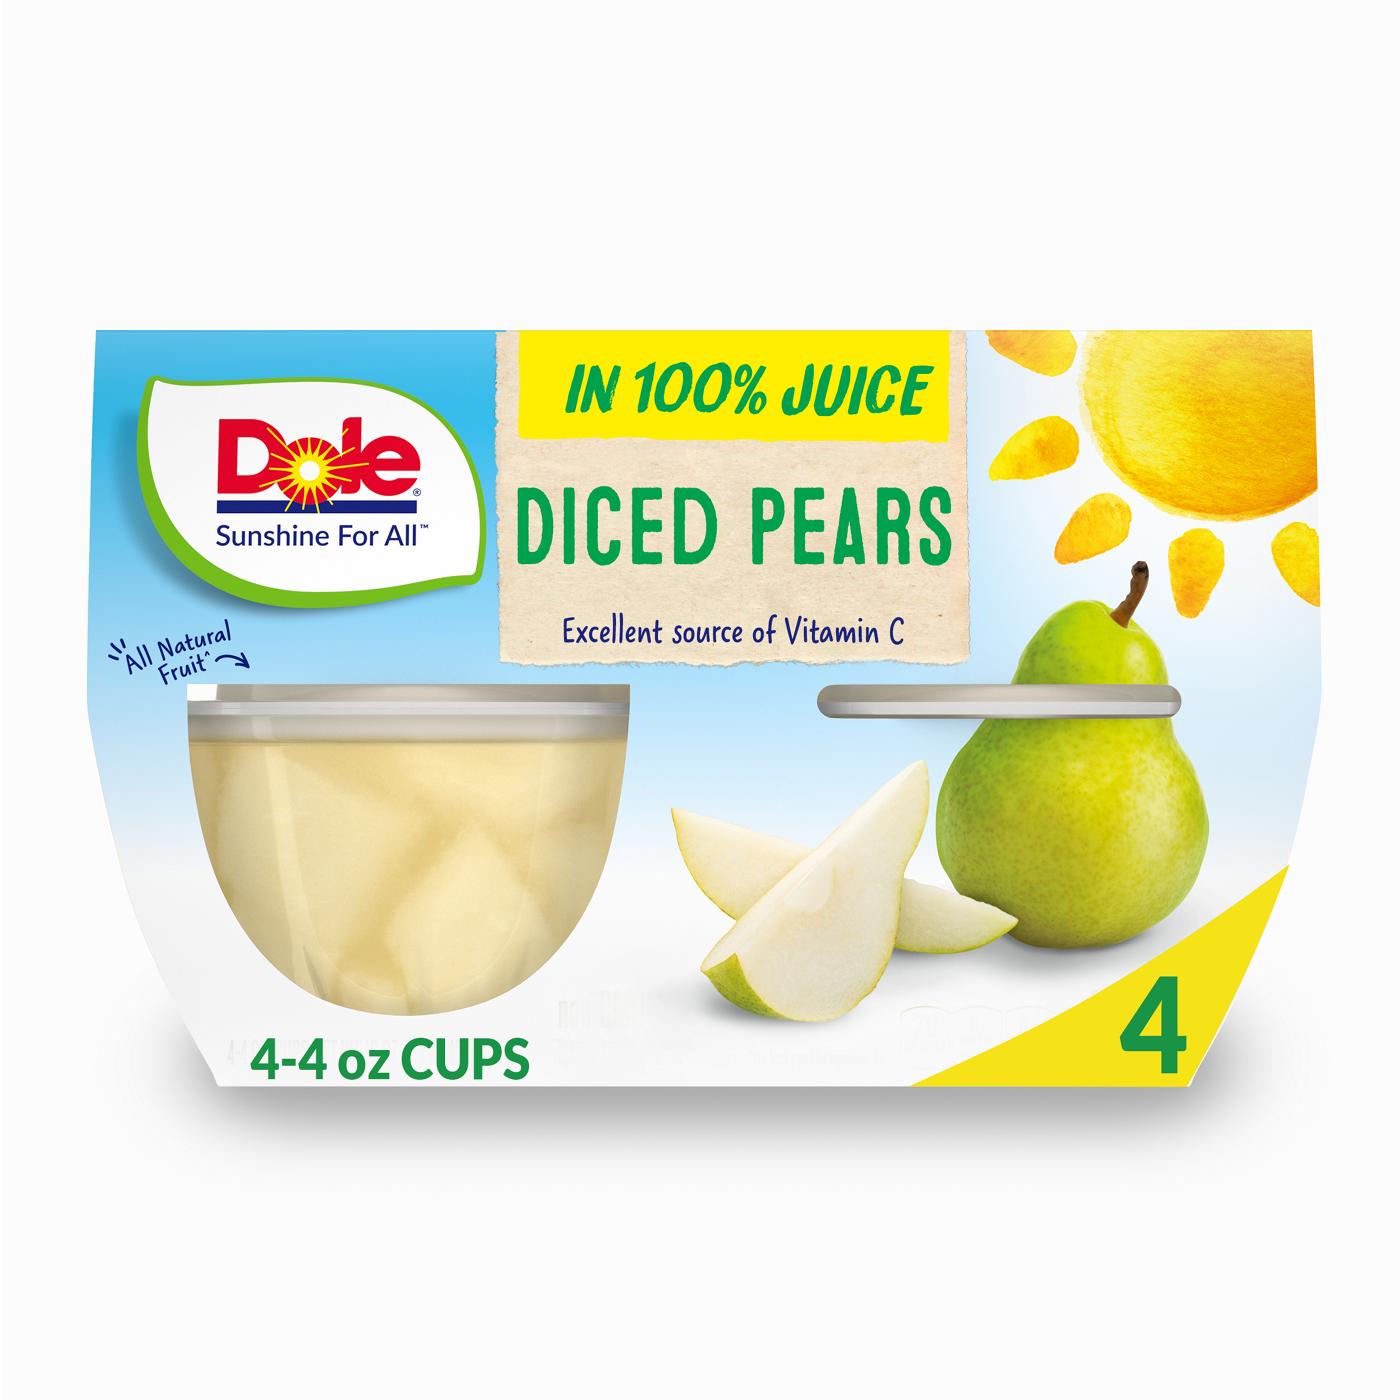 Dole Fruit Bowls - Diced Pears in 100% Juice; image 1 of 7